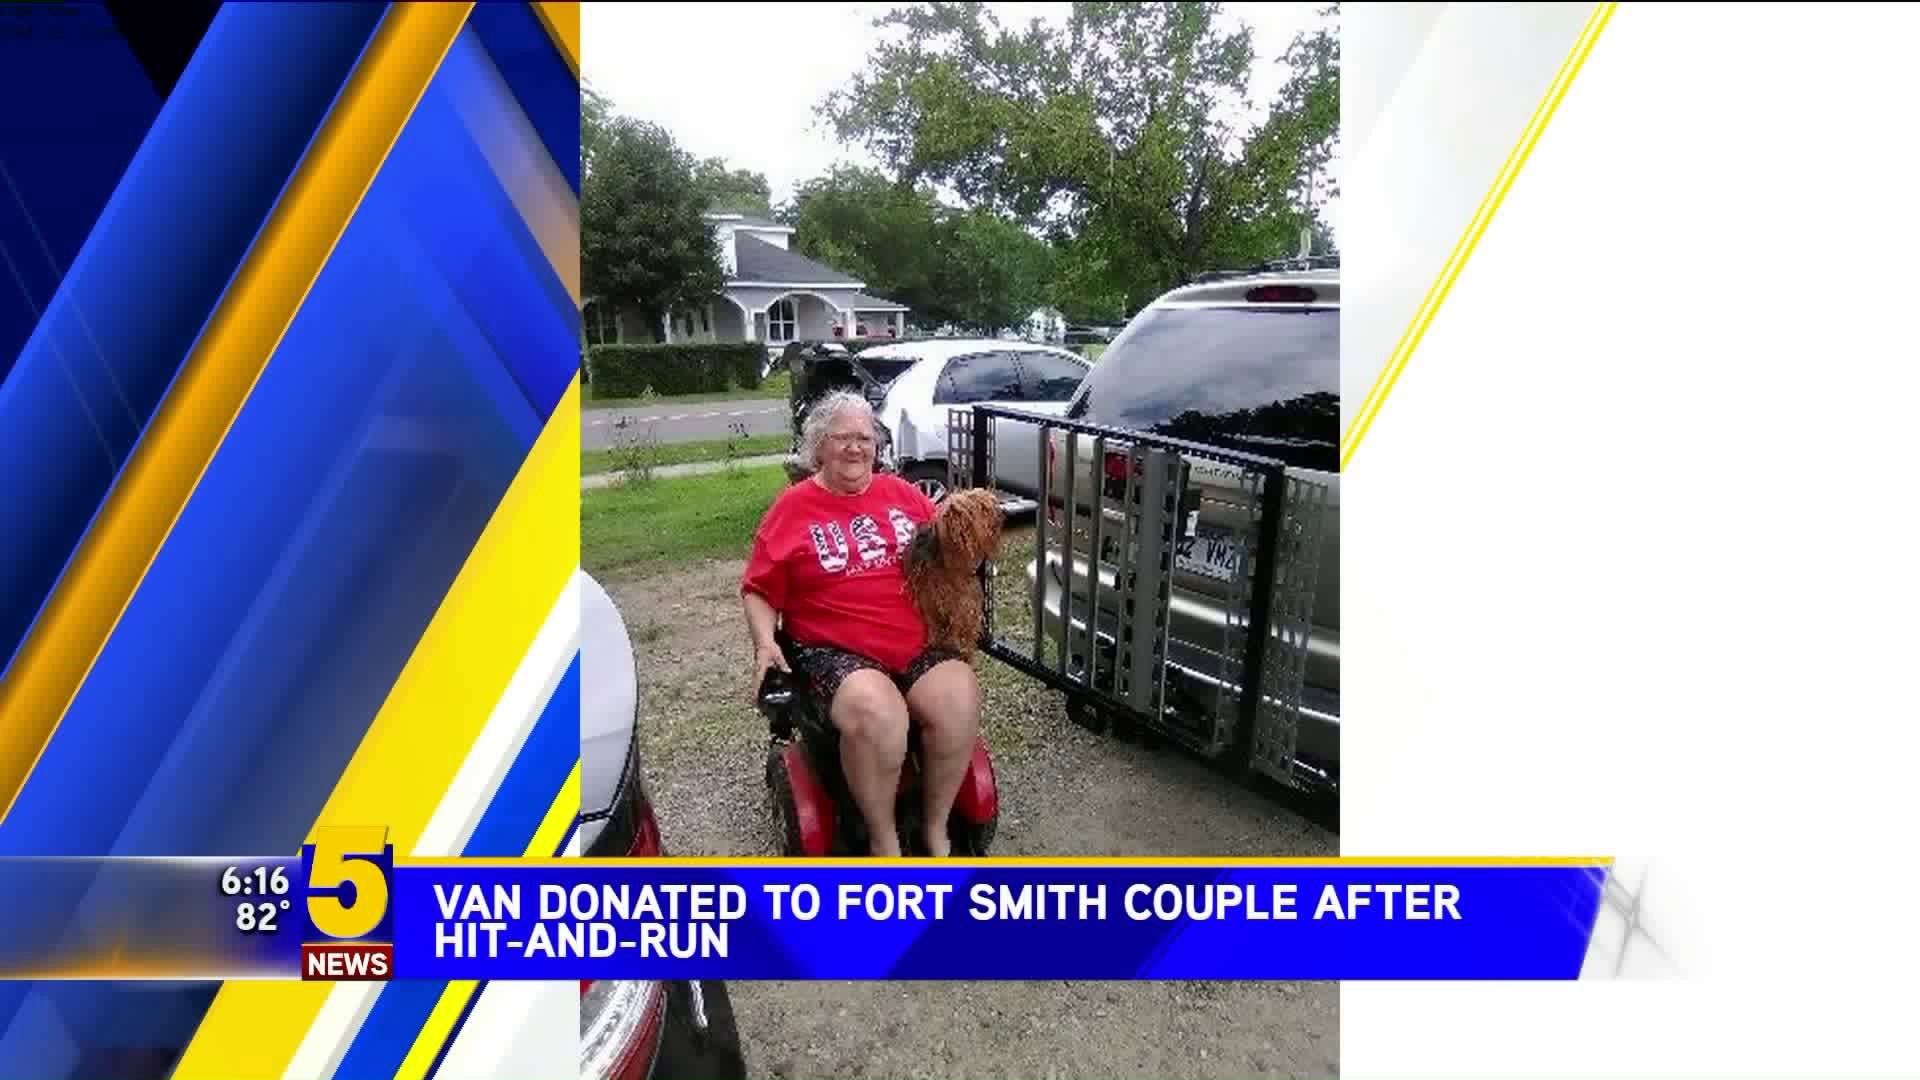 Van Donated To Fort Smith Couple After Hit-And-Run